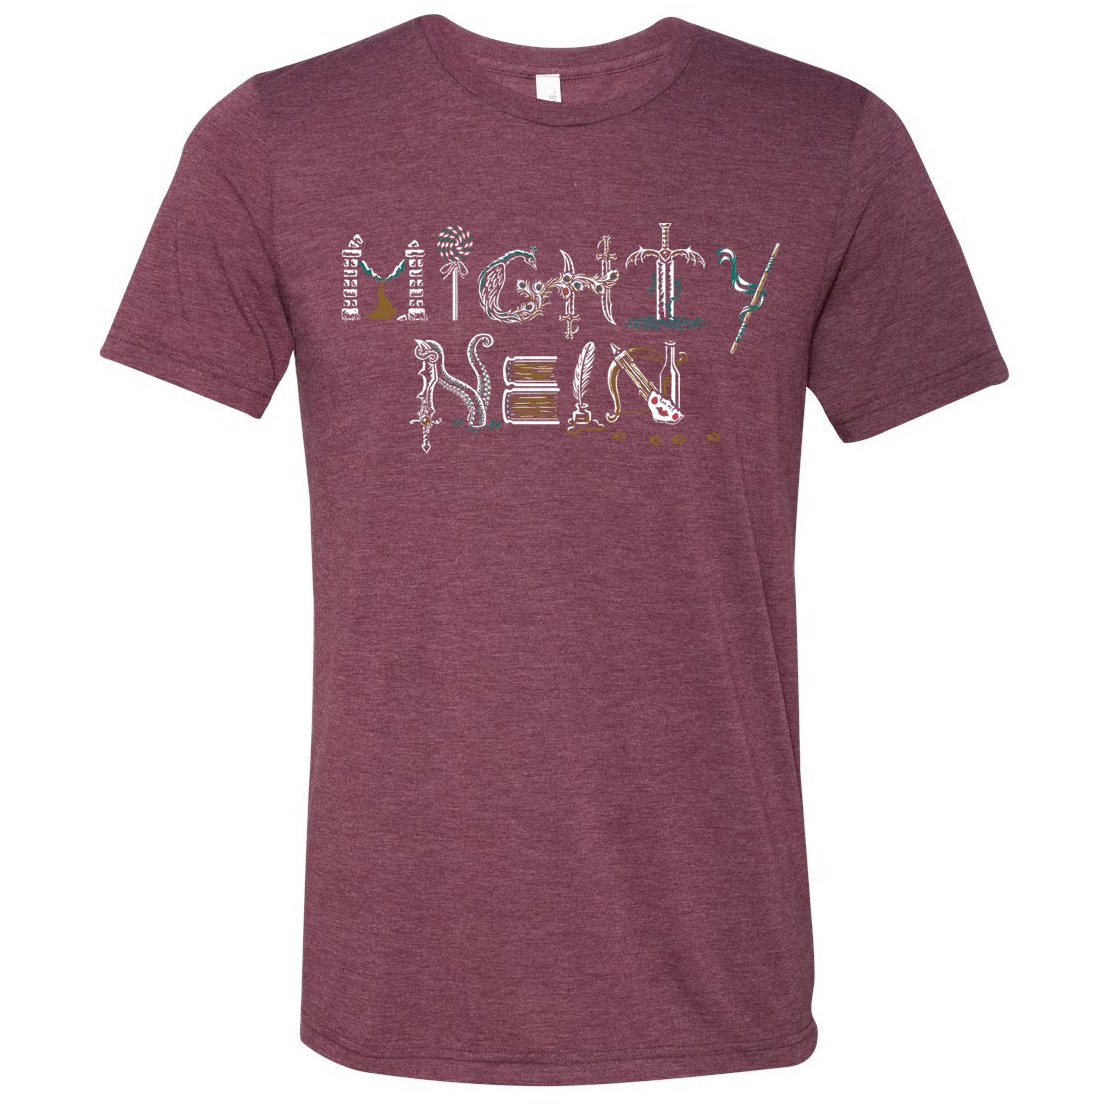 Wreck Snart Fejlfri Critical Role on Twitter: "MERCH HYPE: We've released limited quantities of  our 2018 live show exclusives in our US shop! COPPER DICE. MIGHTY NEIN TEE  BY @melissakelt. GO GO GO! 👉 https://t.co/WUP8BFMLOh